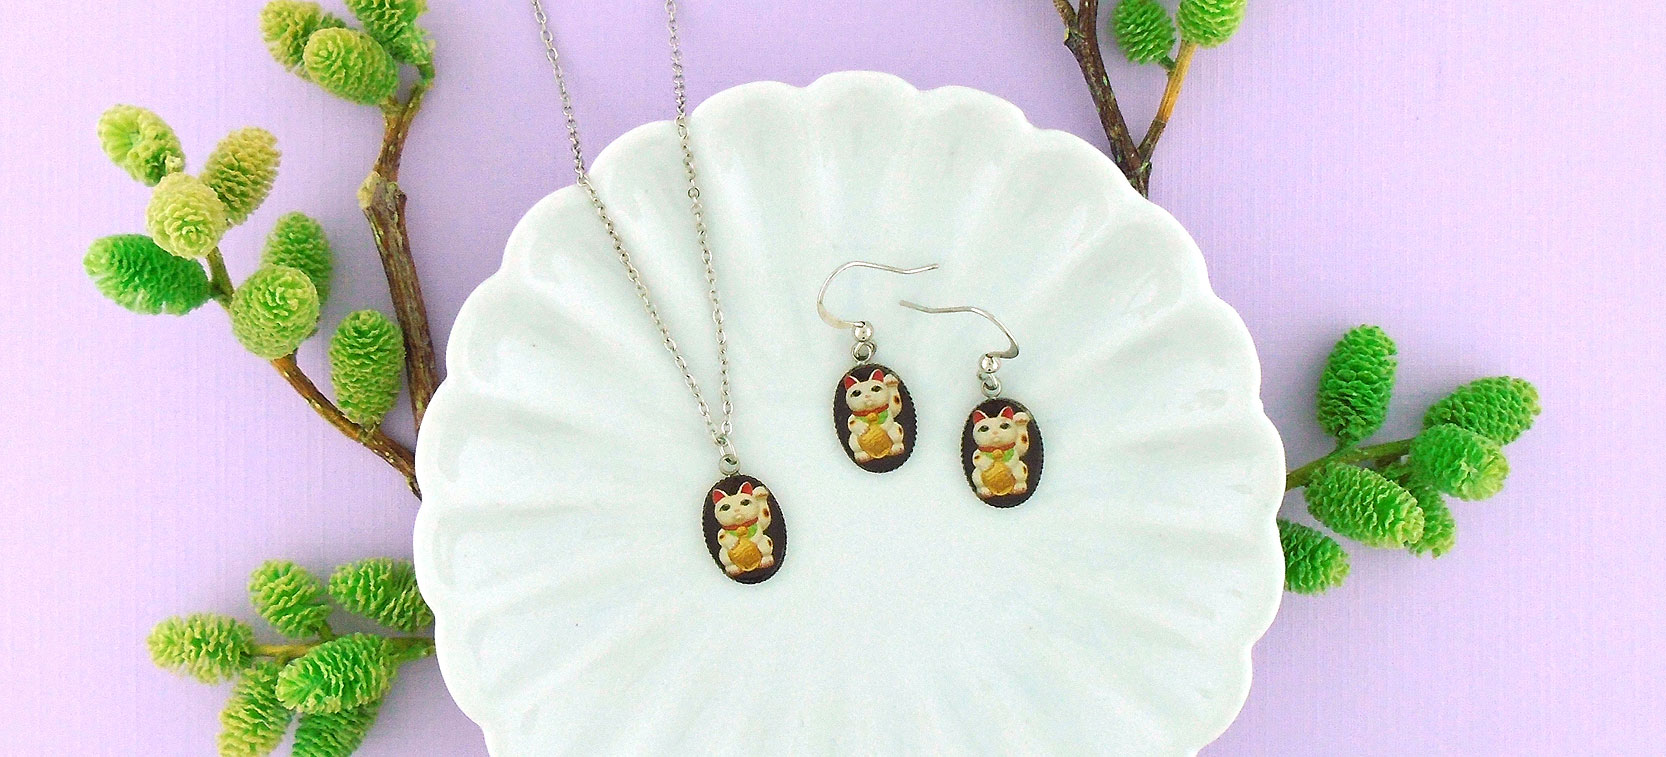 LAVISHY design and wholesale good luck/lucky maneki-neko money cat themed vegan accessories and gfits to gift shops, boutiques and book stores in Canada, USA and worldwide.